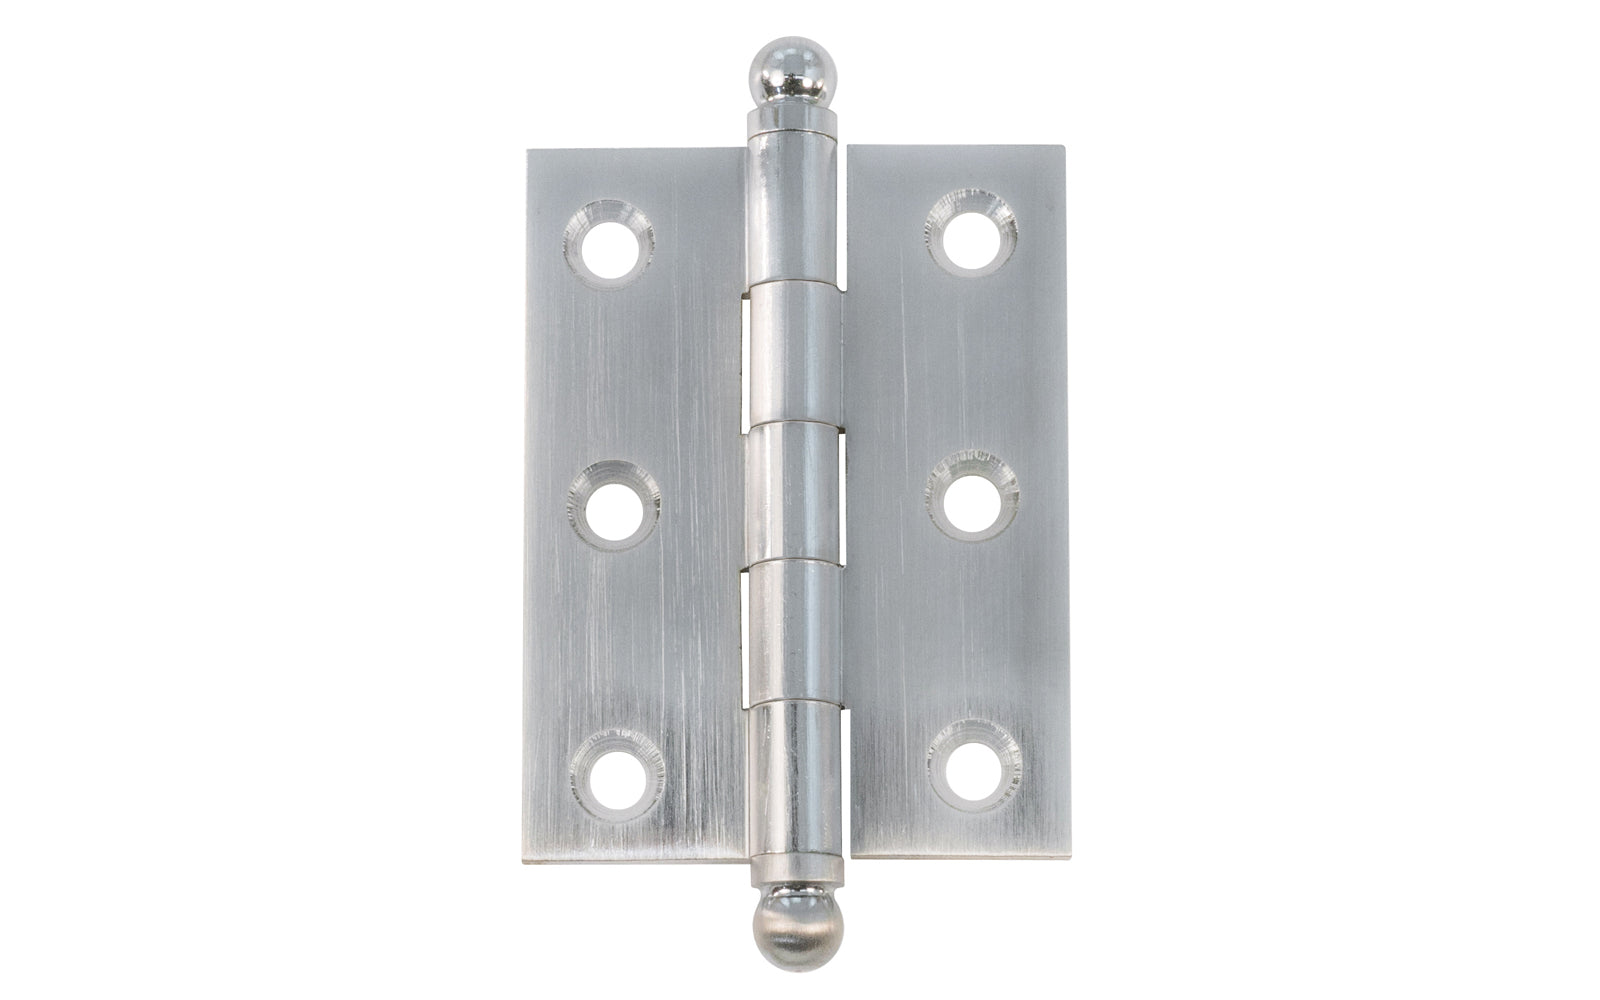 Classic Solid Brass Ball-Tip Cabinet Hinge ~ 2" x 1-1/2". Full mortise extruded hinges. 3/32" heavy duty leaf thickness gauge. Non-removable fixed hinge pin with ball tips. High quality thick cabinet hinge with ball tips. Brushed Chrome finish.